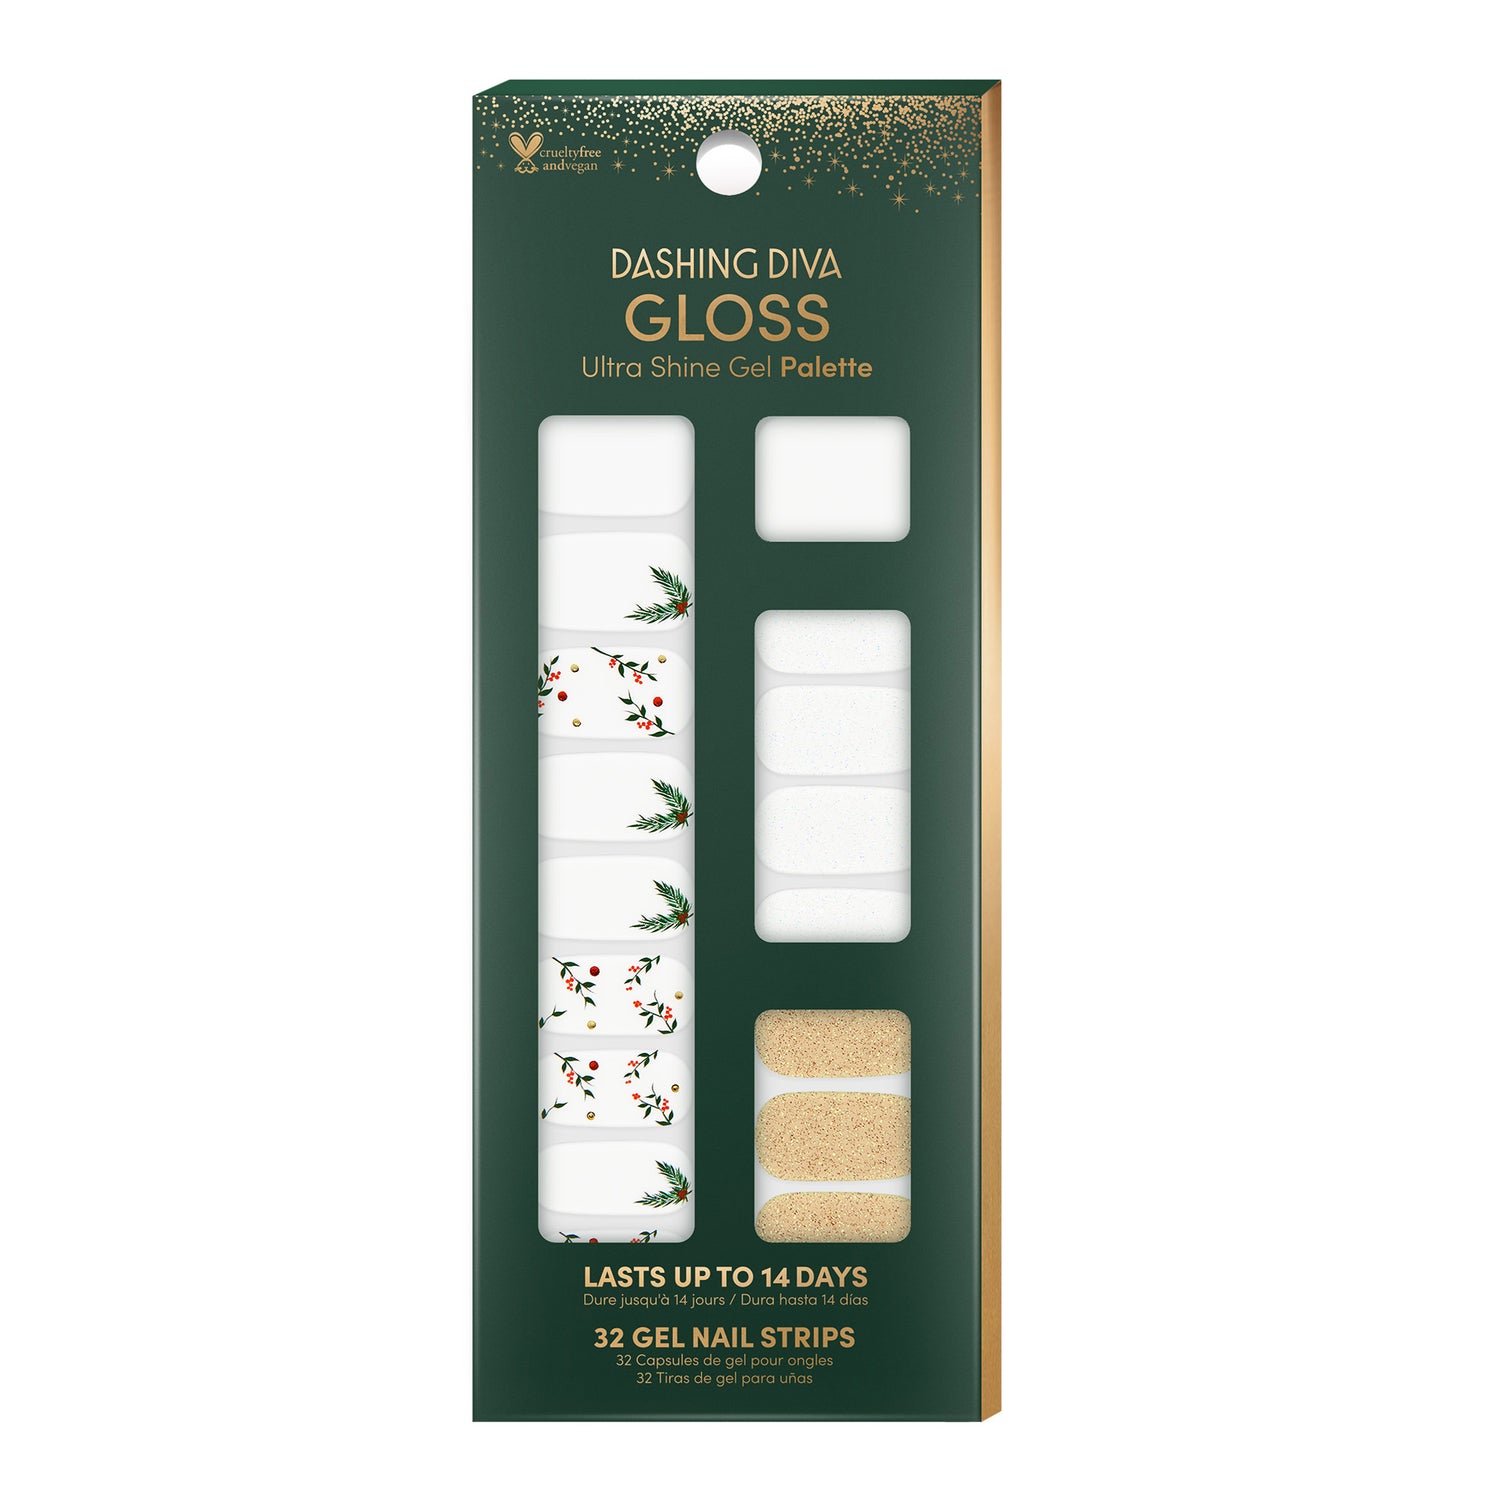 Semi-sheer white nail strips featuring gold glitter, iridescent glitter, red & gold foil details, and mistletoe accents with a glossy, high-shine finish.